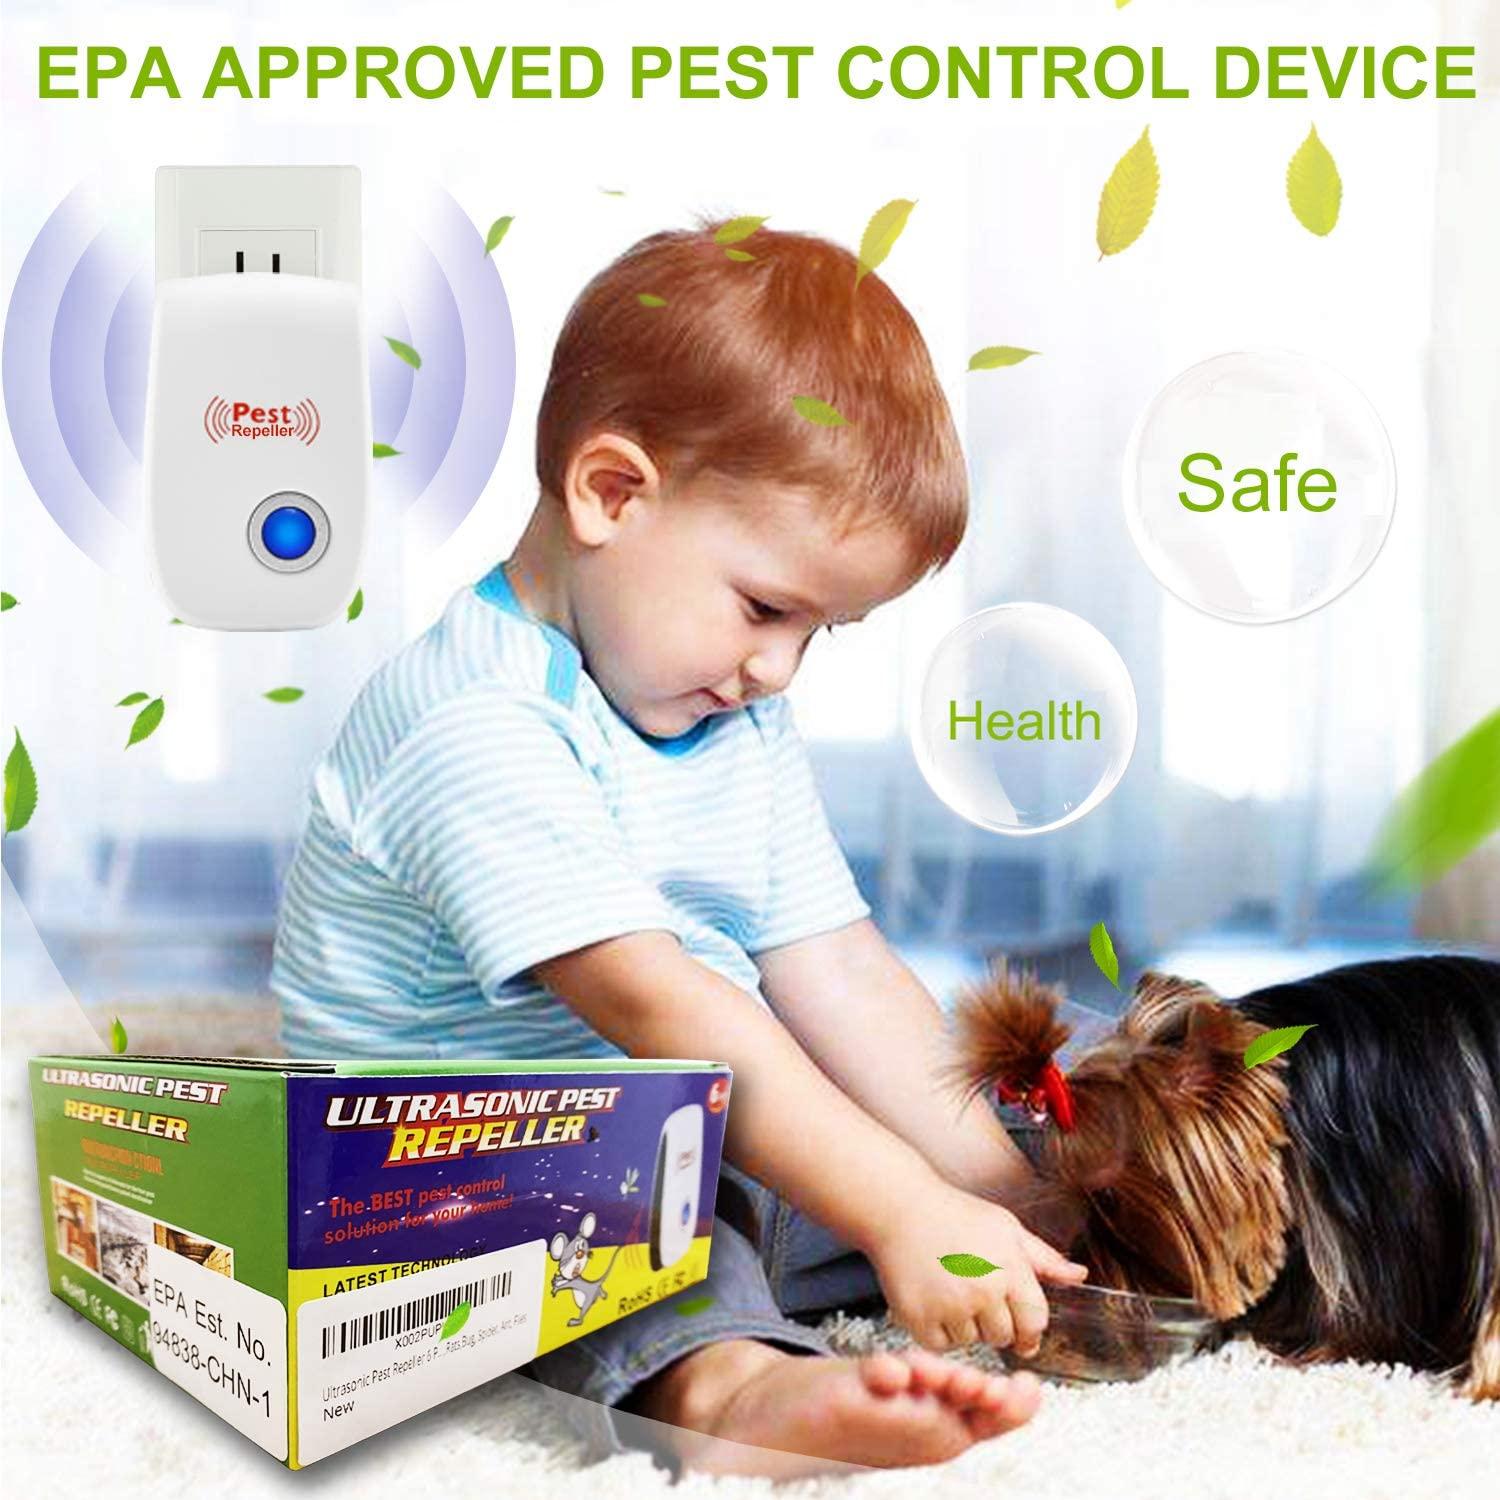 Dropship Ultrasonic Pest Repeller 6 Packs, The Newest Pest Repellent  Electronic Indoor Plug In For Insects, Mosquitoes, Mice, Ants, Roaches,  Spiders, Bugs, Flies, Cockroach, Pest Control, Non-Toxic to Sell Online at a